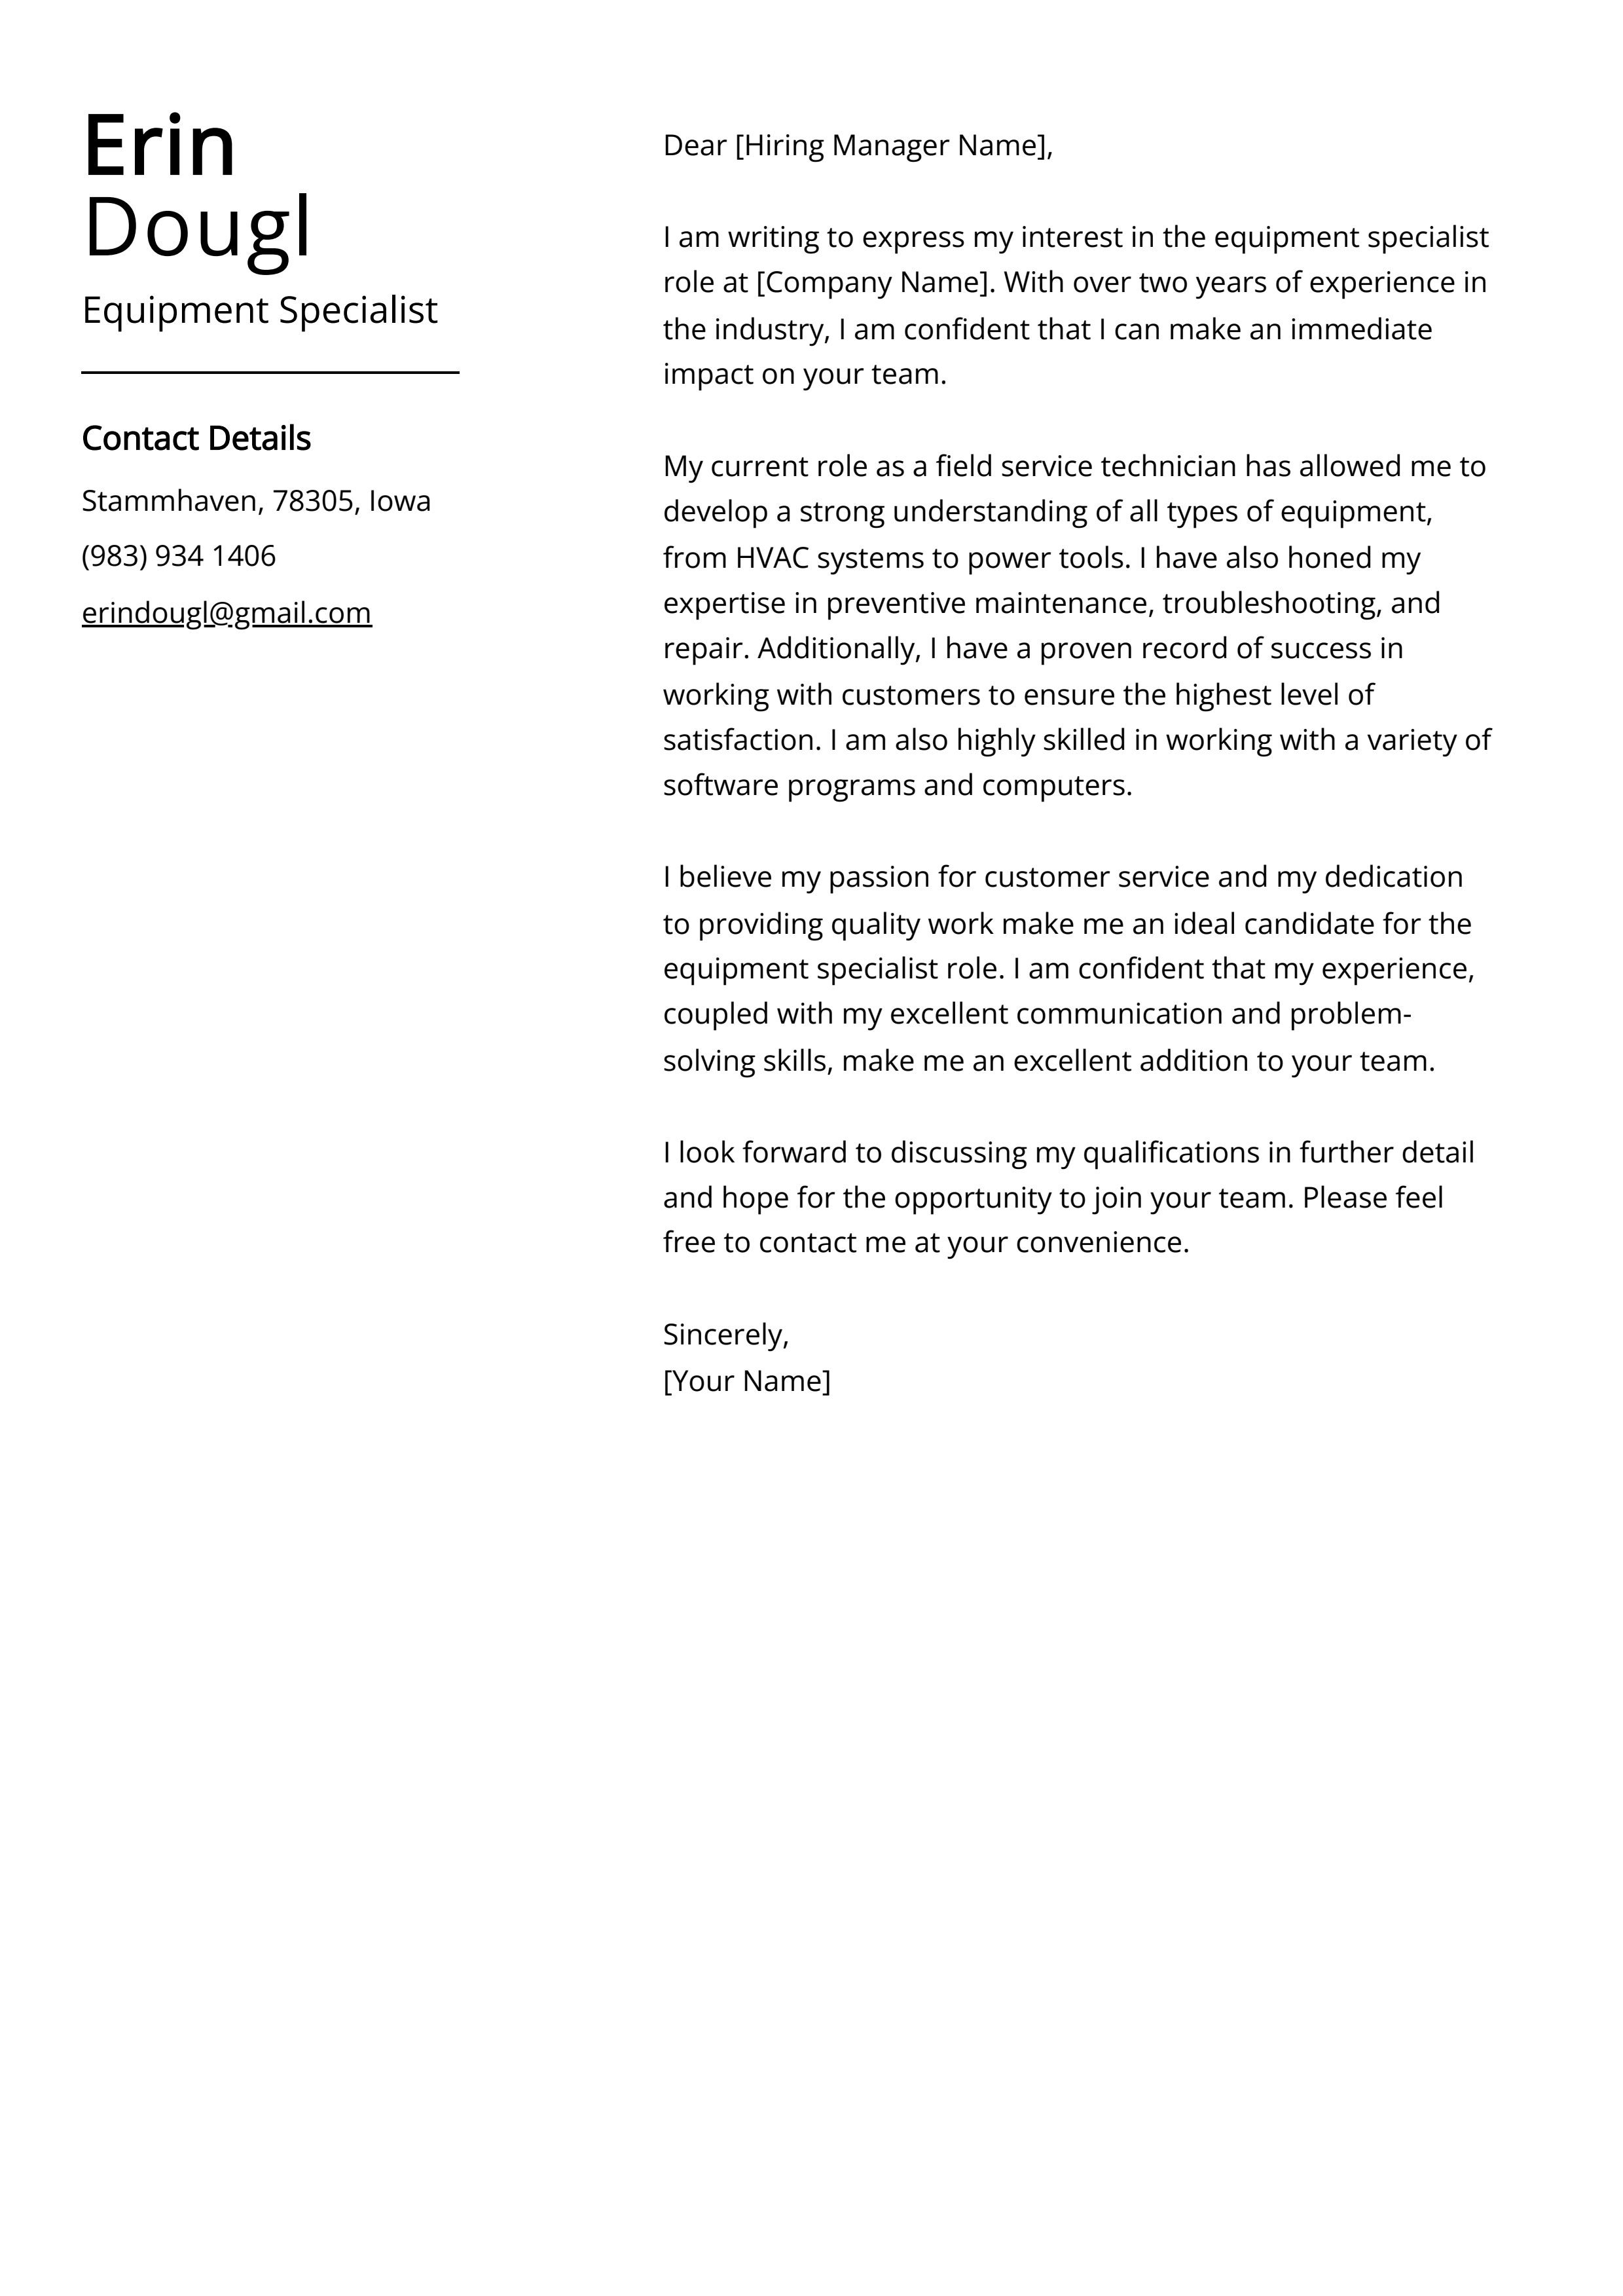 Equipment Specialist Cover Letter Example